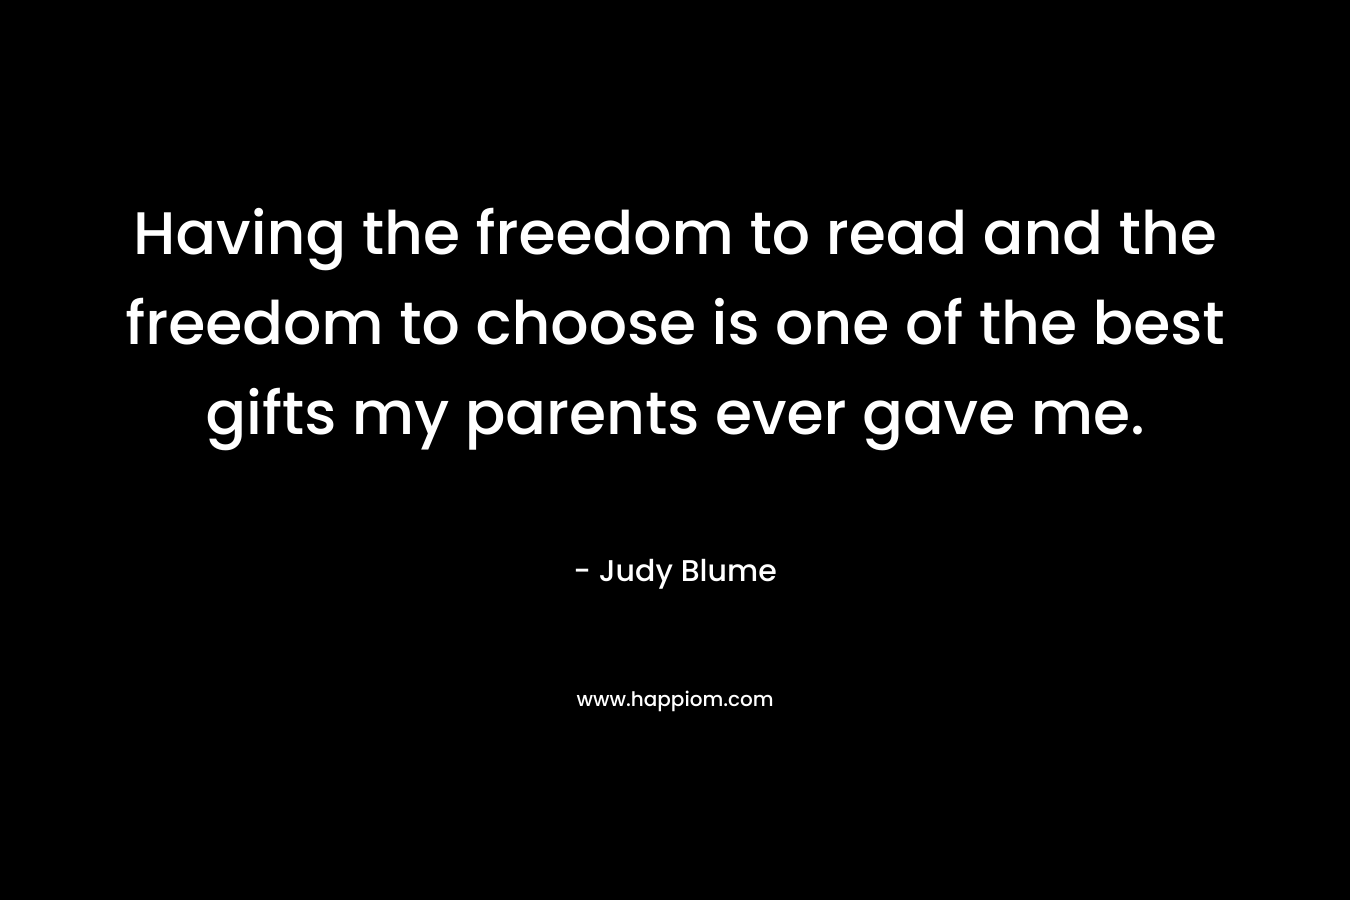 Having the freedom to read and the freedom to choose is one of the best gifts my parents ever gave me. – Judy Blume